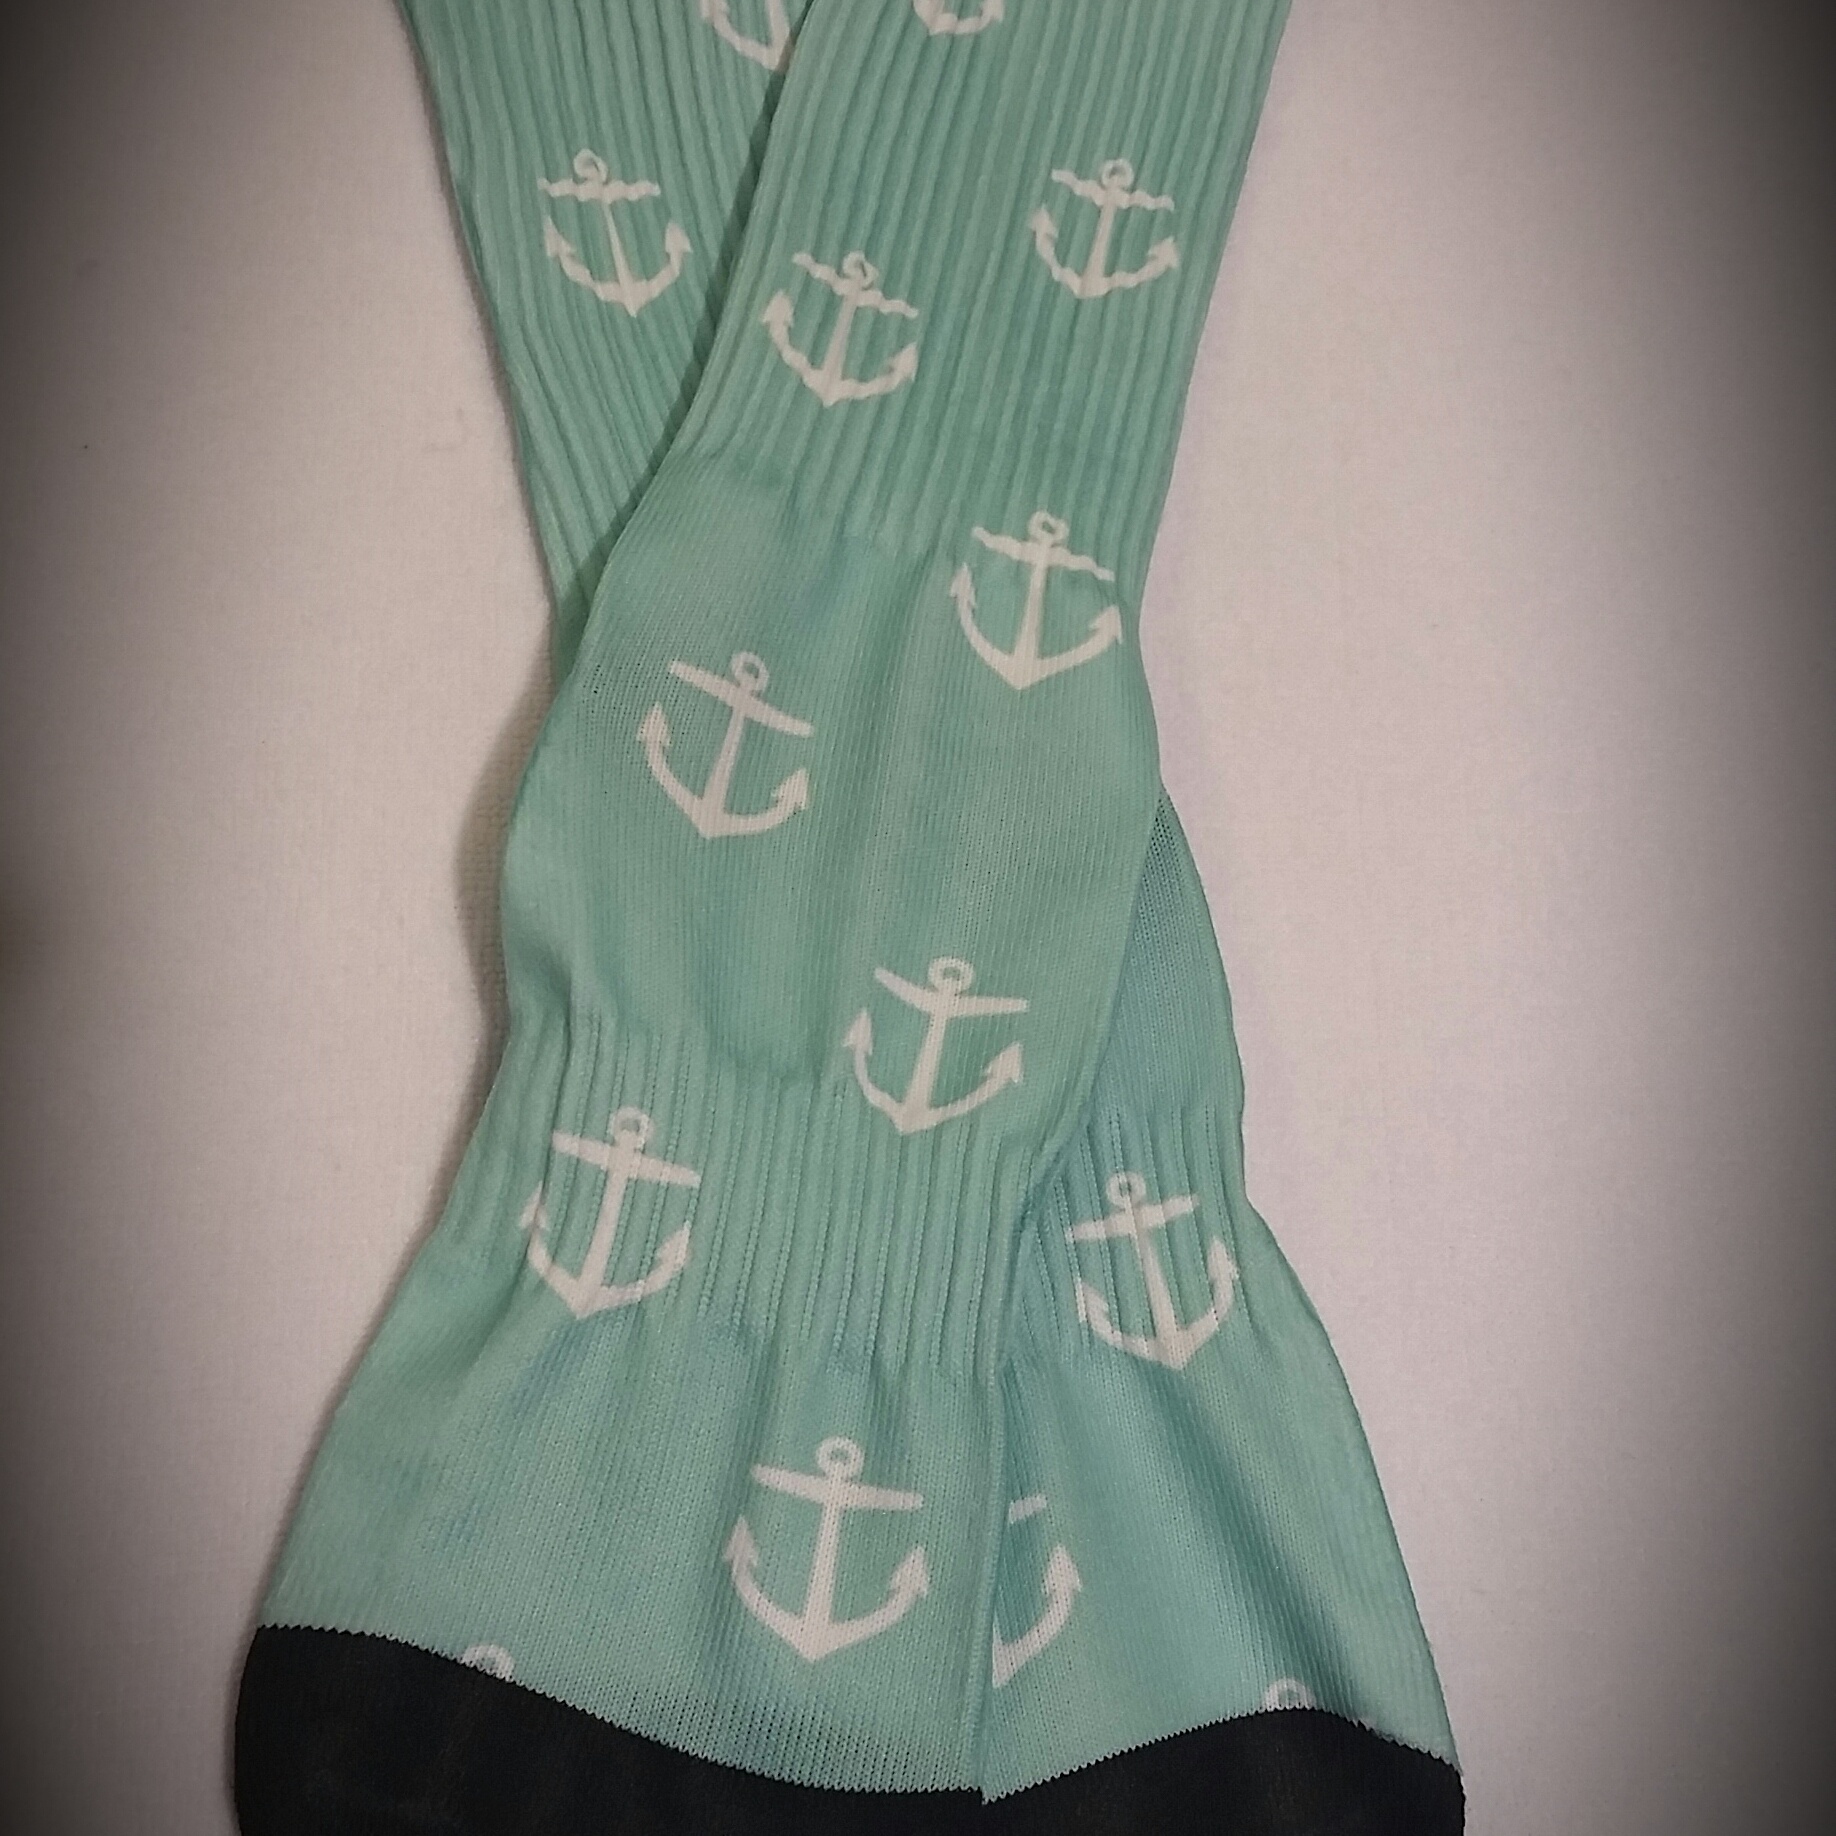 Anchor Socks made with sublimation printing